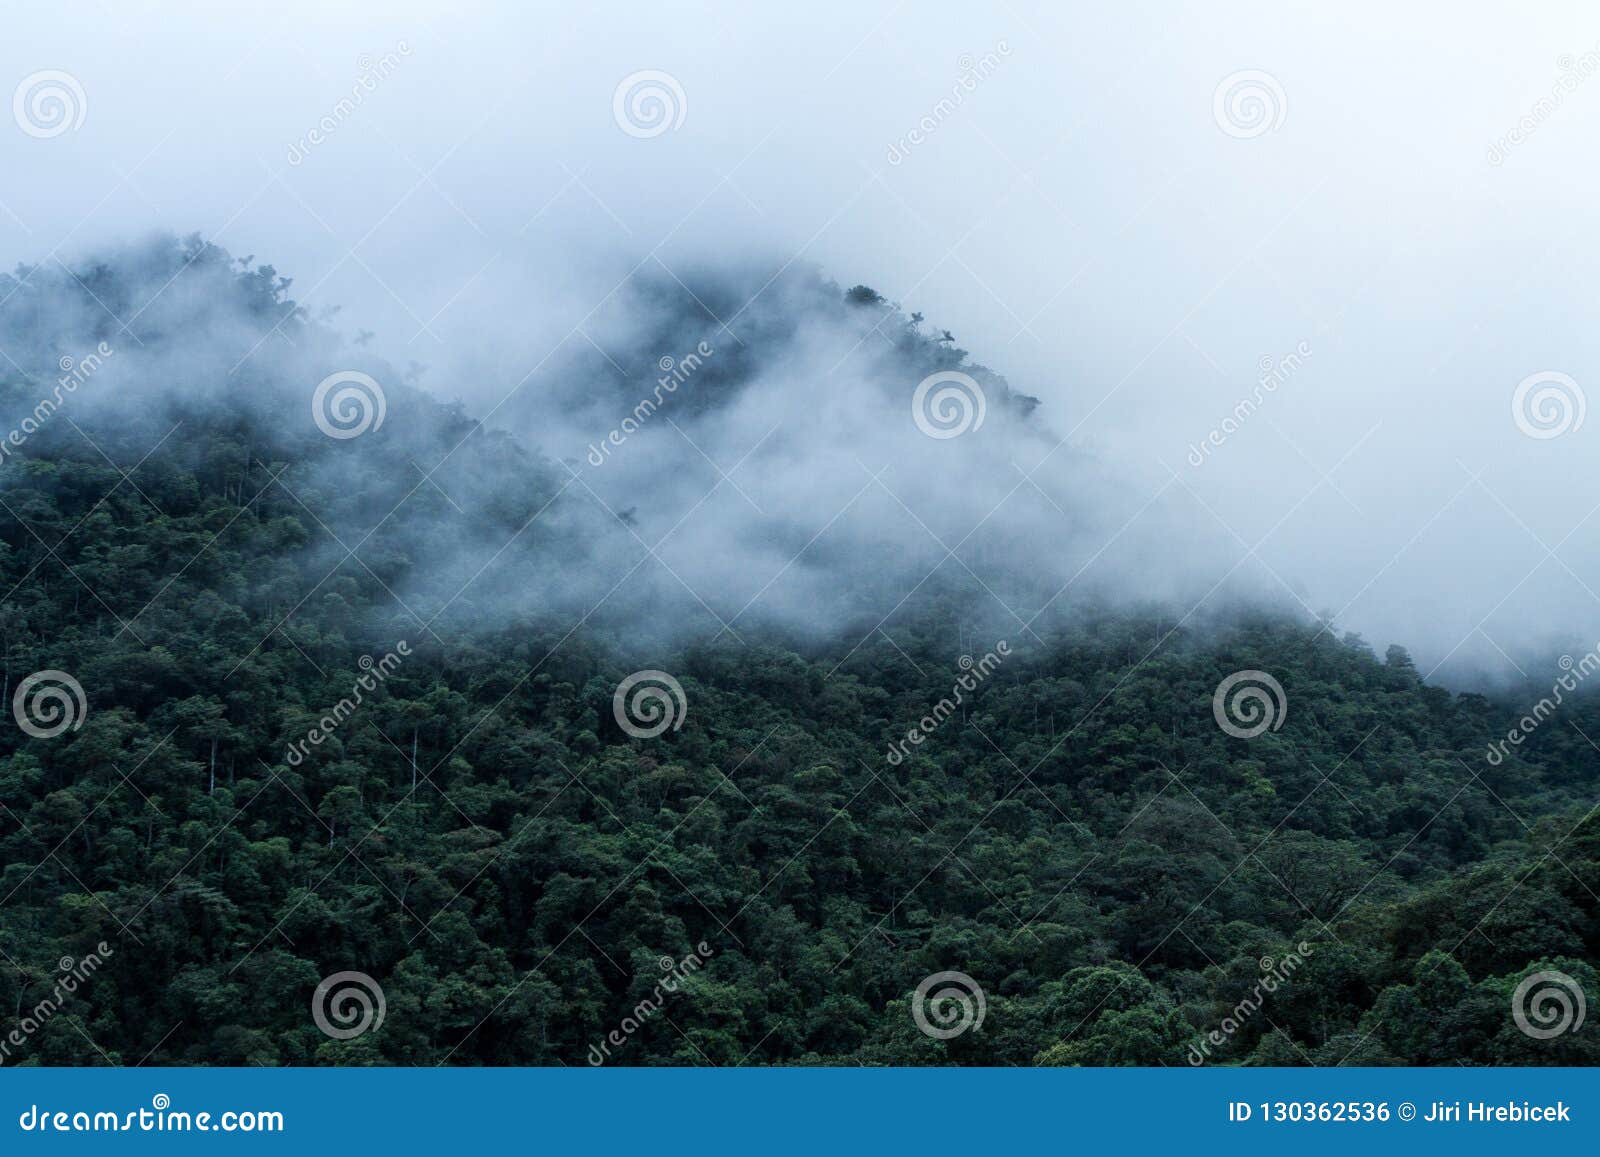 trees near road leading to mountain road tree wet rain forest  woodland mountain cloudscape mist   Scenery wallpaper Nature  wallpaper Mountain wallpaper